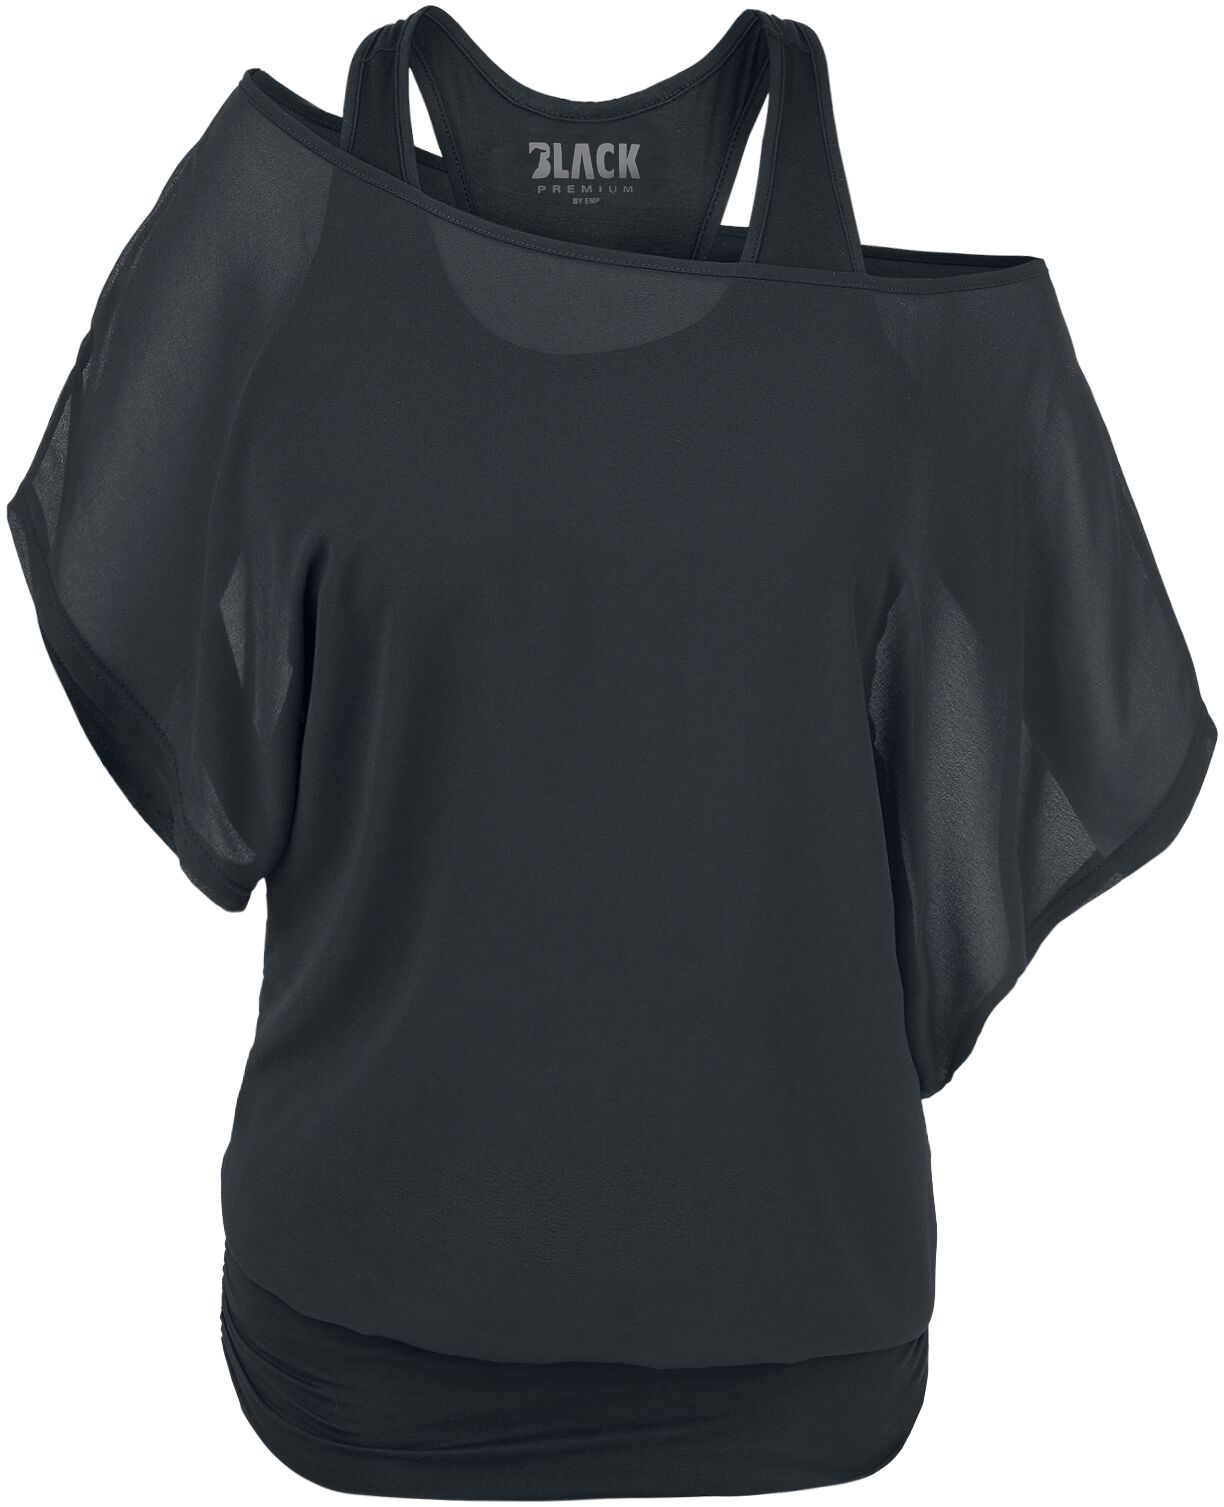 Image of T-Shirt di Black Premium by EMP - Black T-Shirt with Bat Sleeves - S a 5XL - Donna - nero